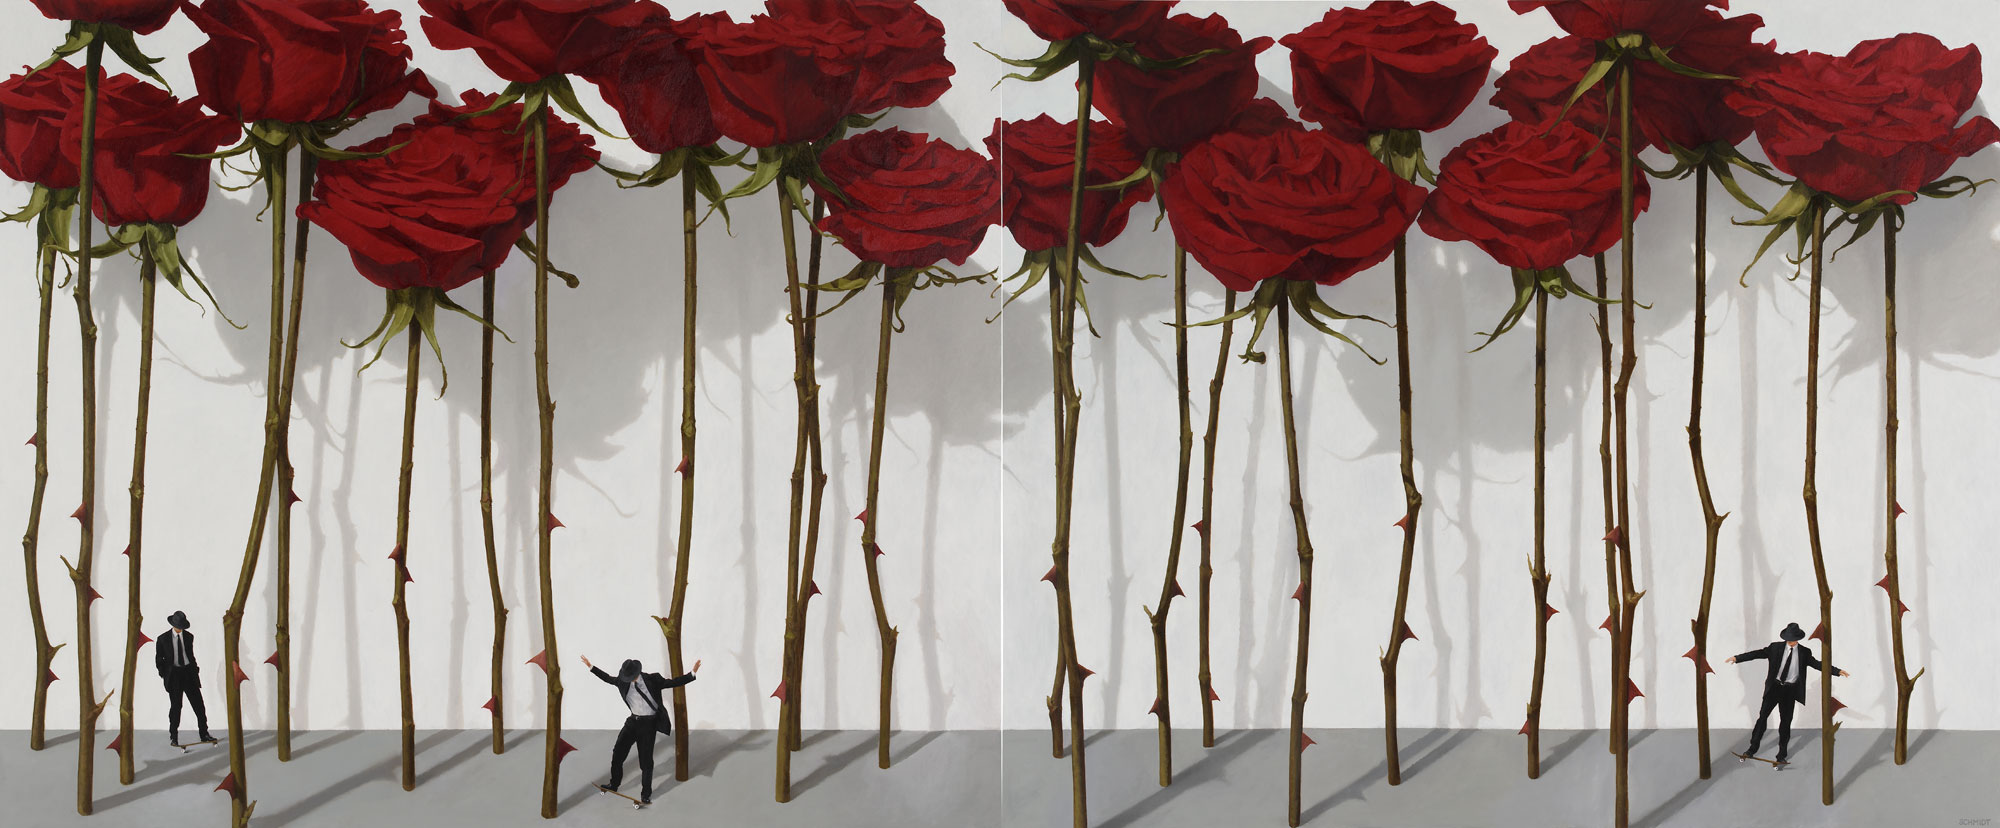 24 standing red roses white wall with shadows, diminutive male figures wearing suits and fedora hats skateboarding